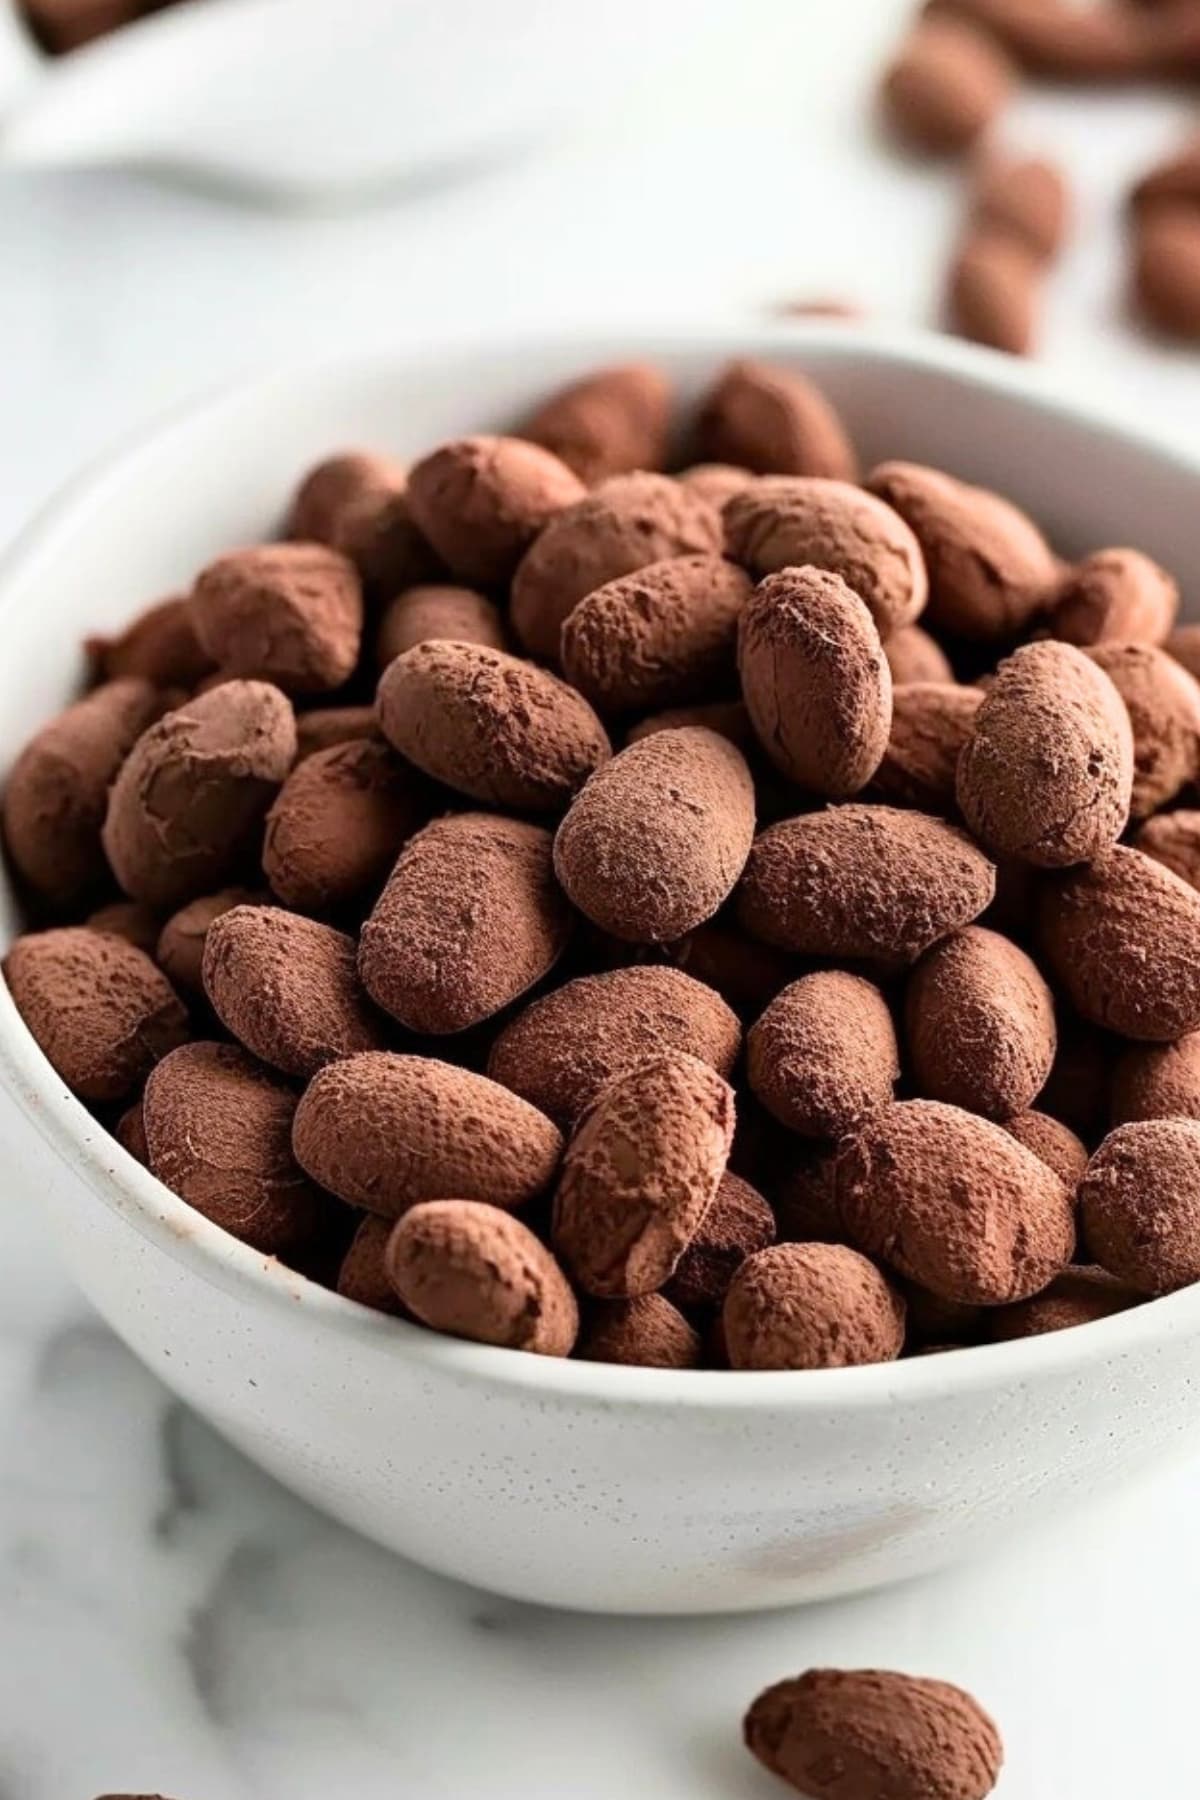 White bowl filled with chocolate and cocoa coated almonds.